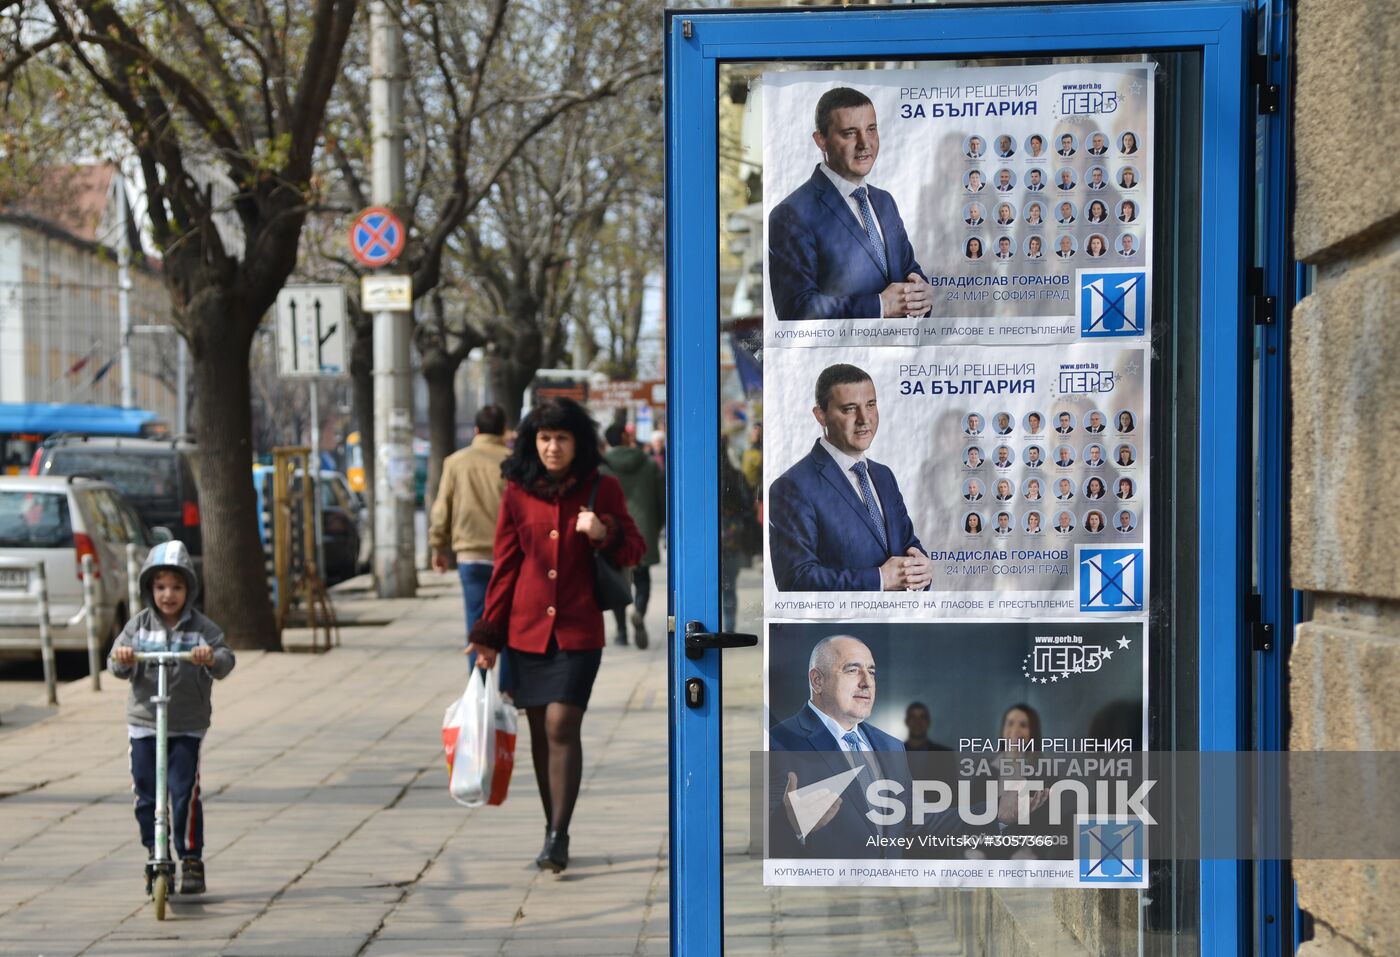 Parliamentary elections in Bulgaria